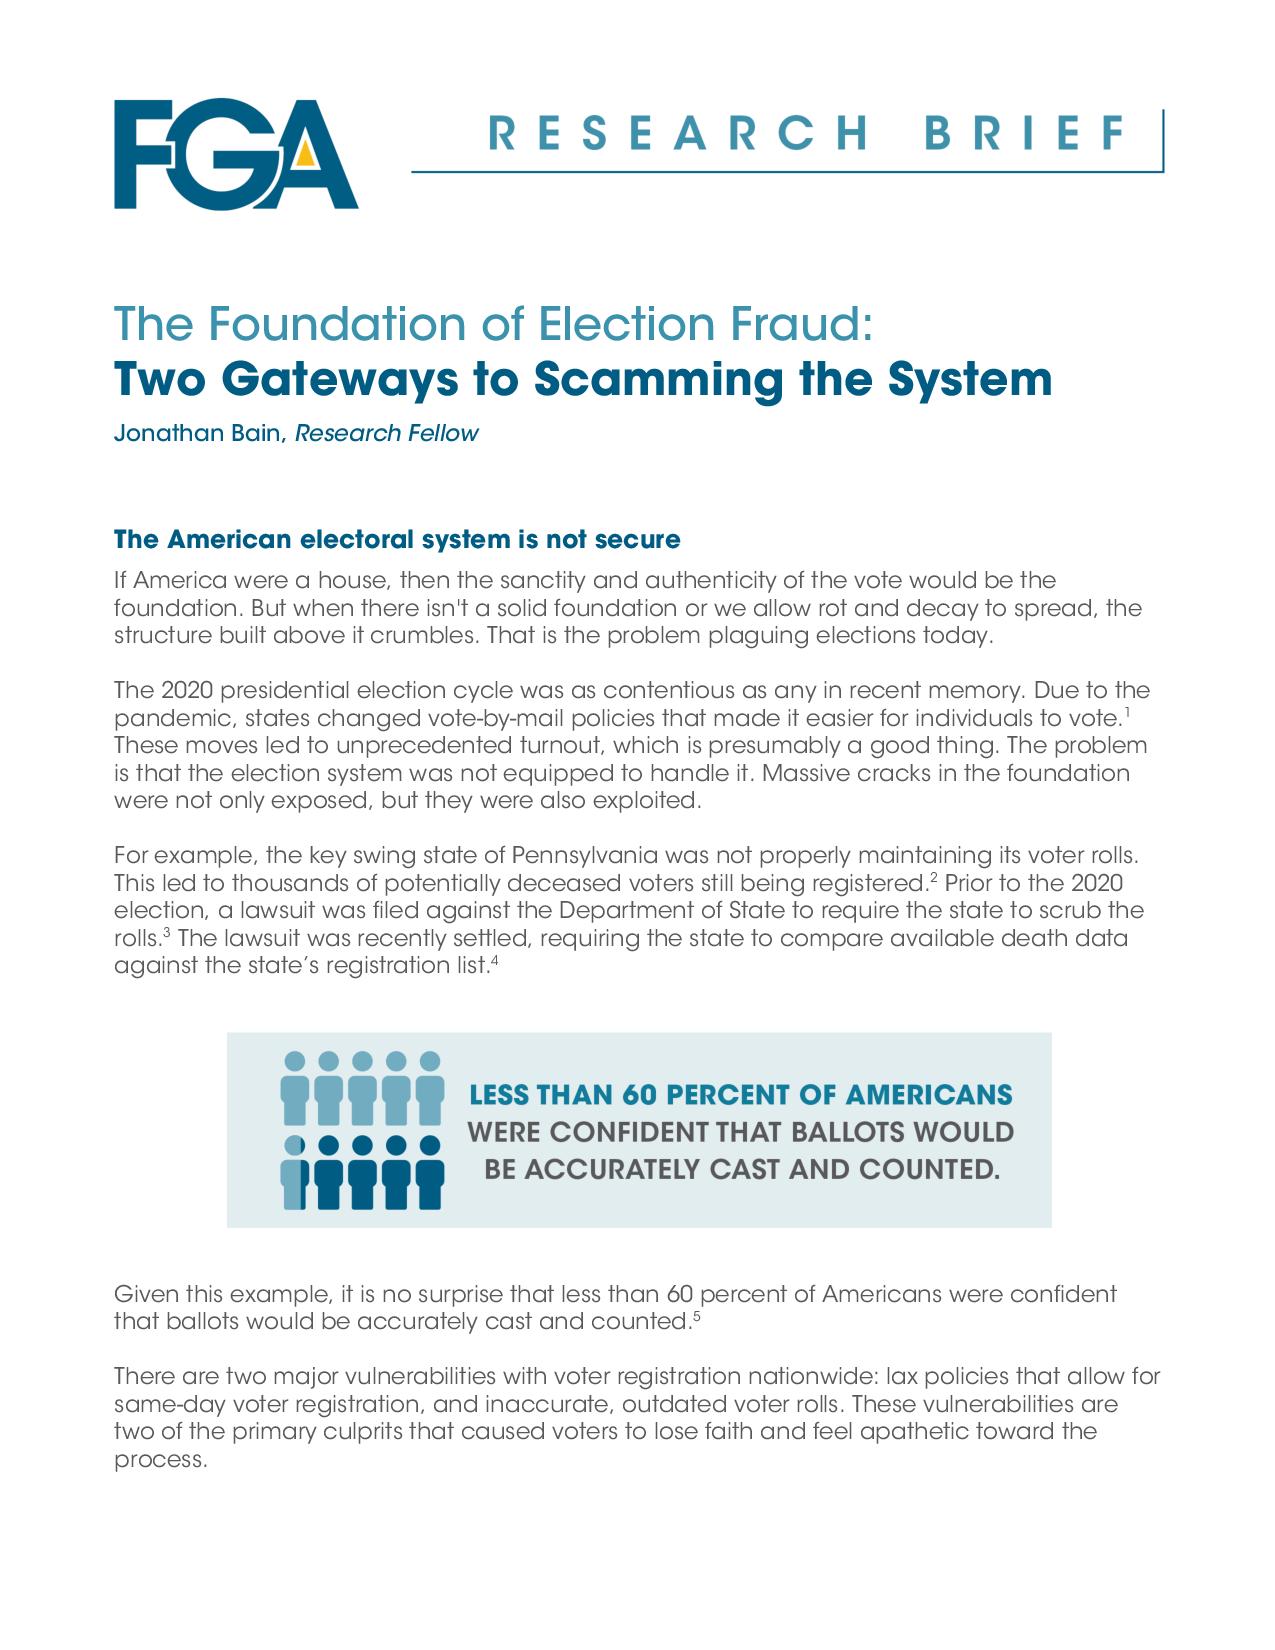 The Foundation of Election Fraud: Two Gateways to Scamming the System